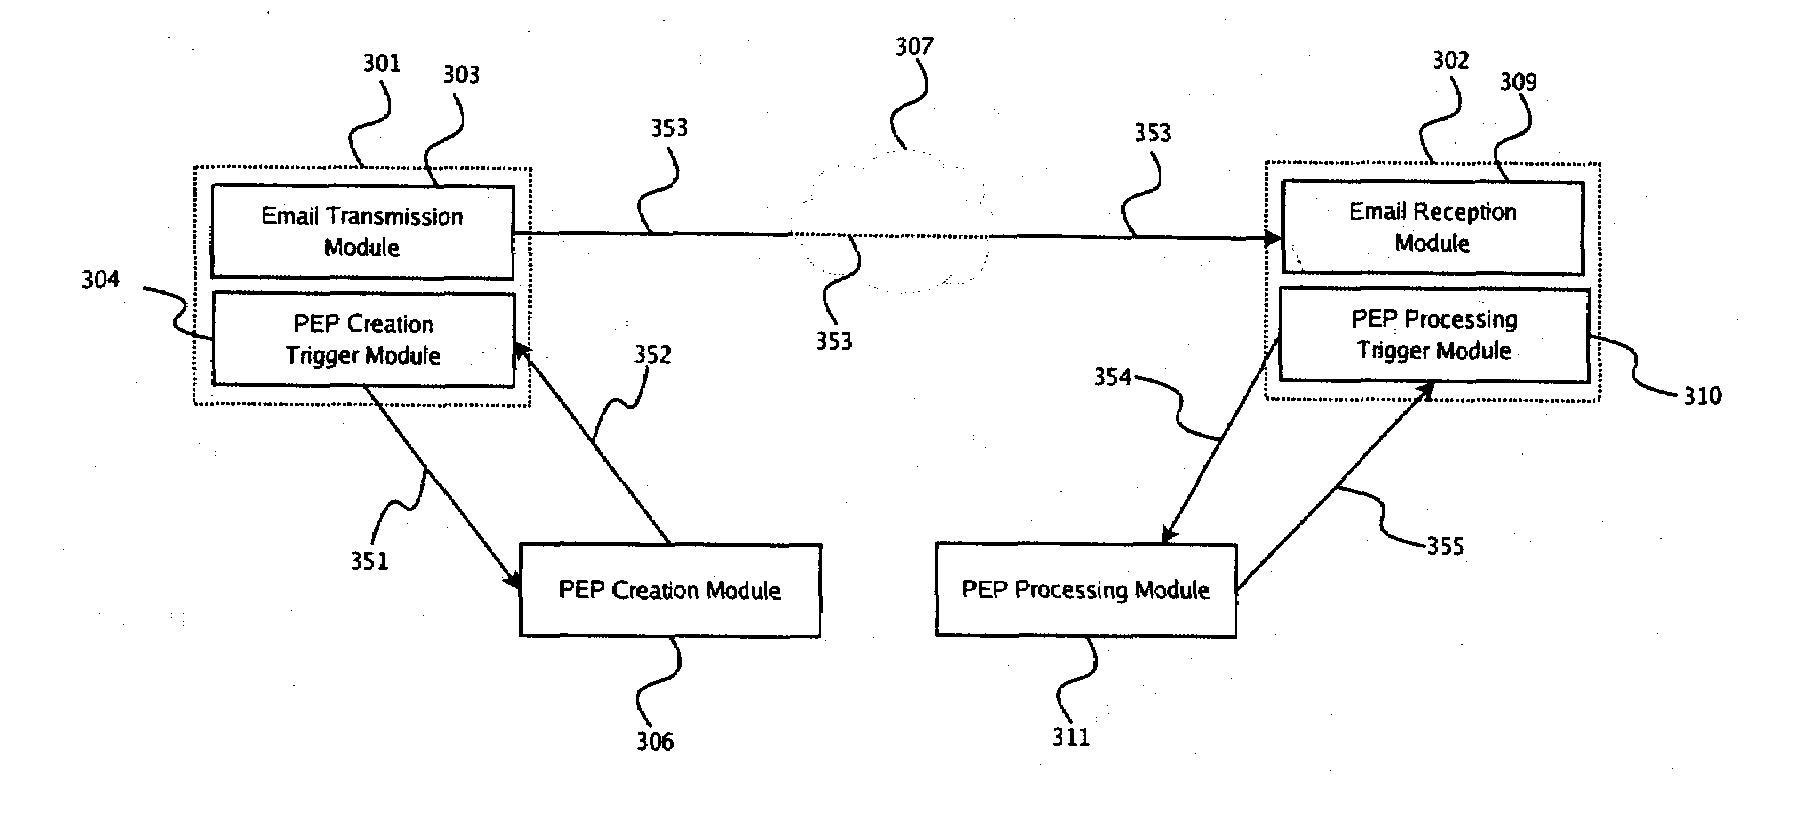 System and Method for End-to-End Electronic Mail-Encryption